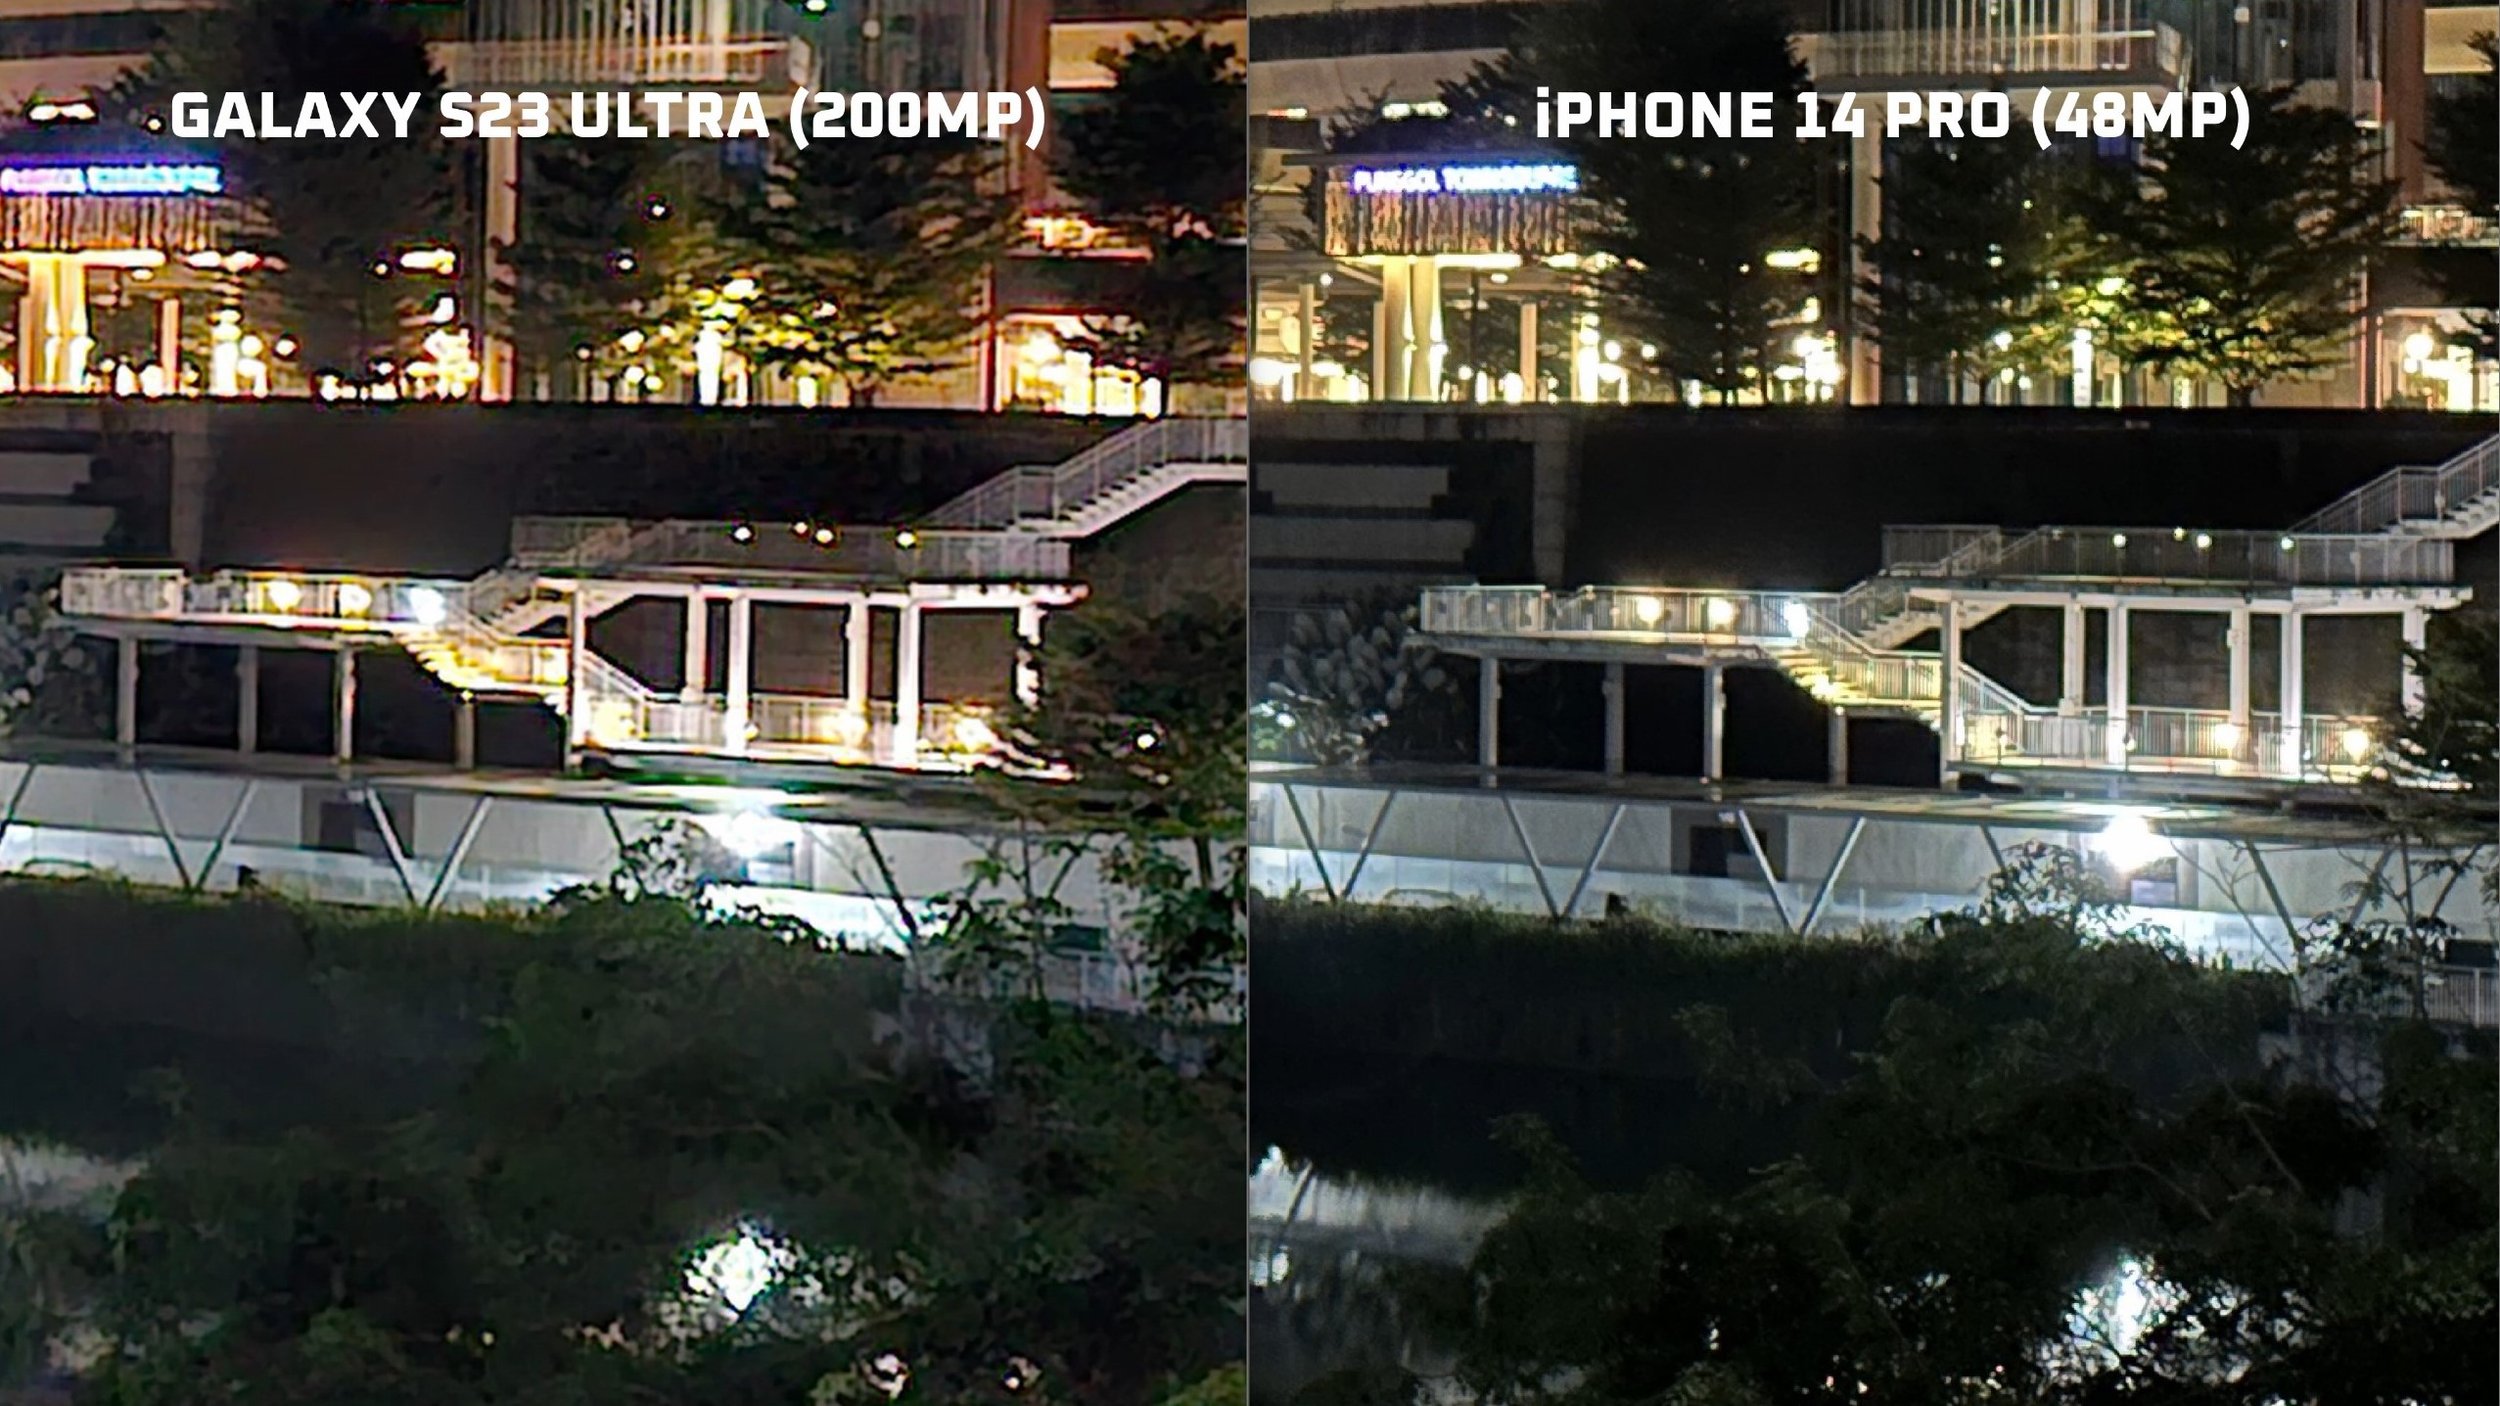 Condensed Samsung Galaxy S23 Ultra 200 MP camera image sizes mean